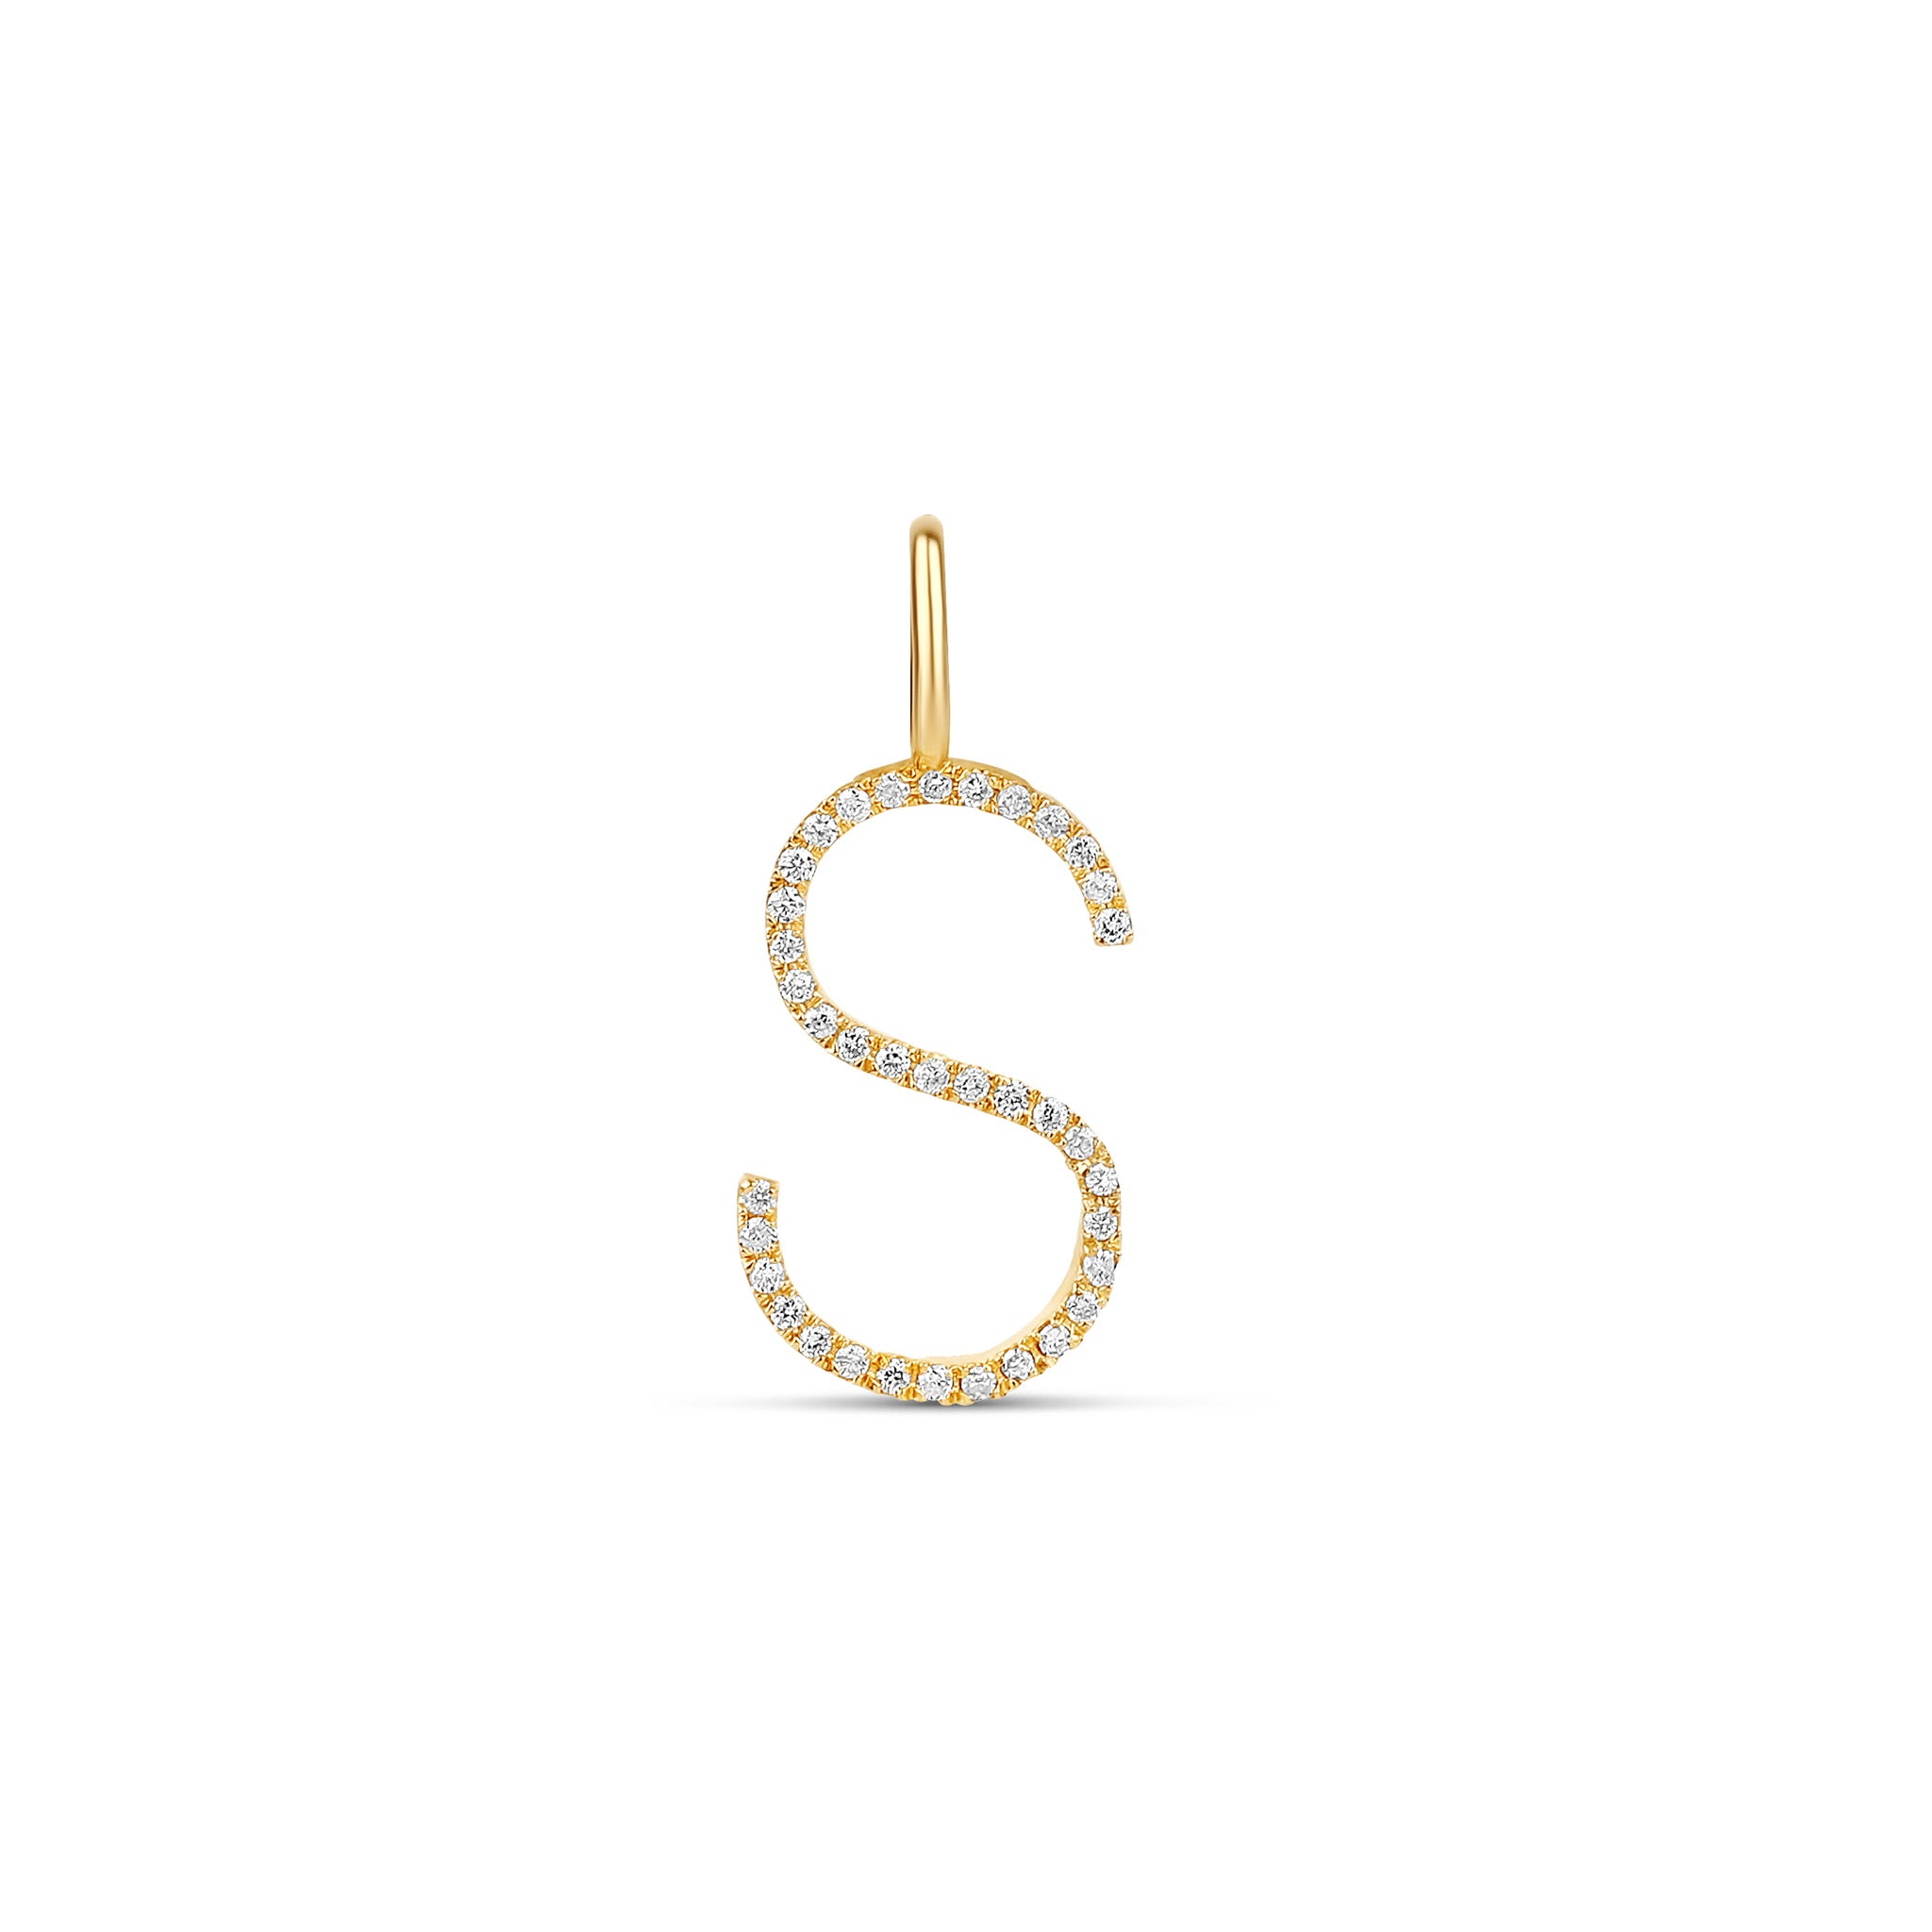 Oval shape initial charm, Letter necklace with diamond - Elegant